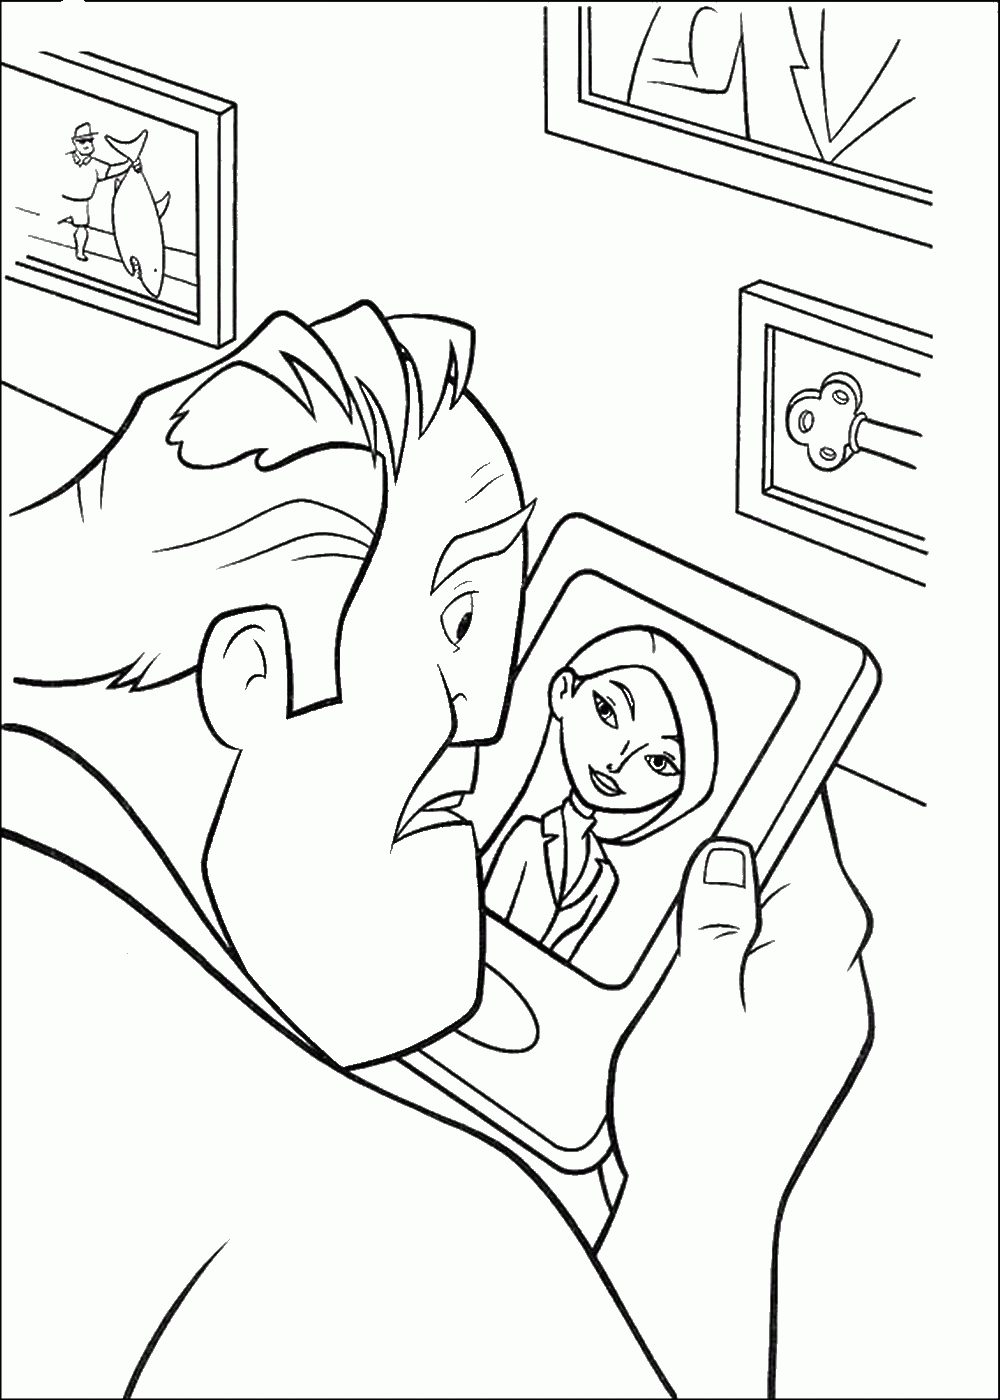 Download Disney Incredibles Coloring Pages - Coloring Home